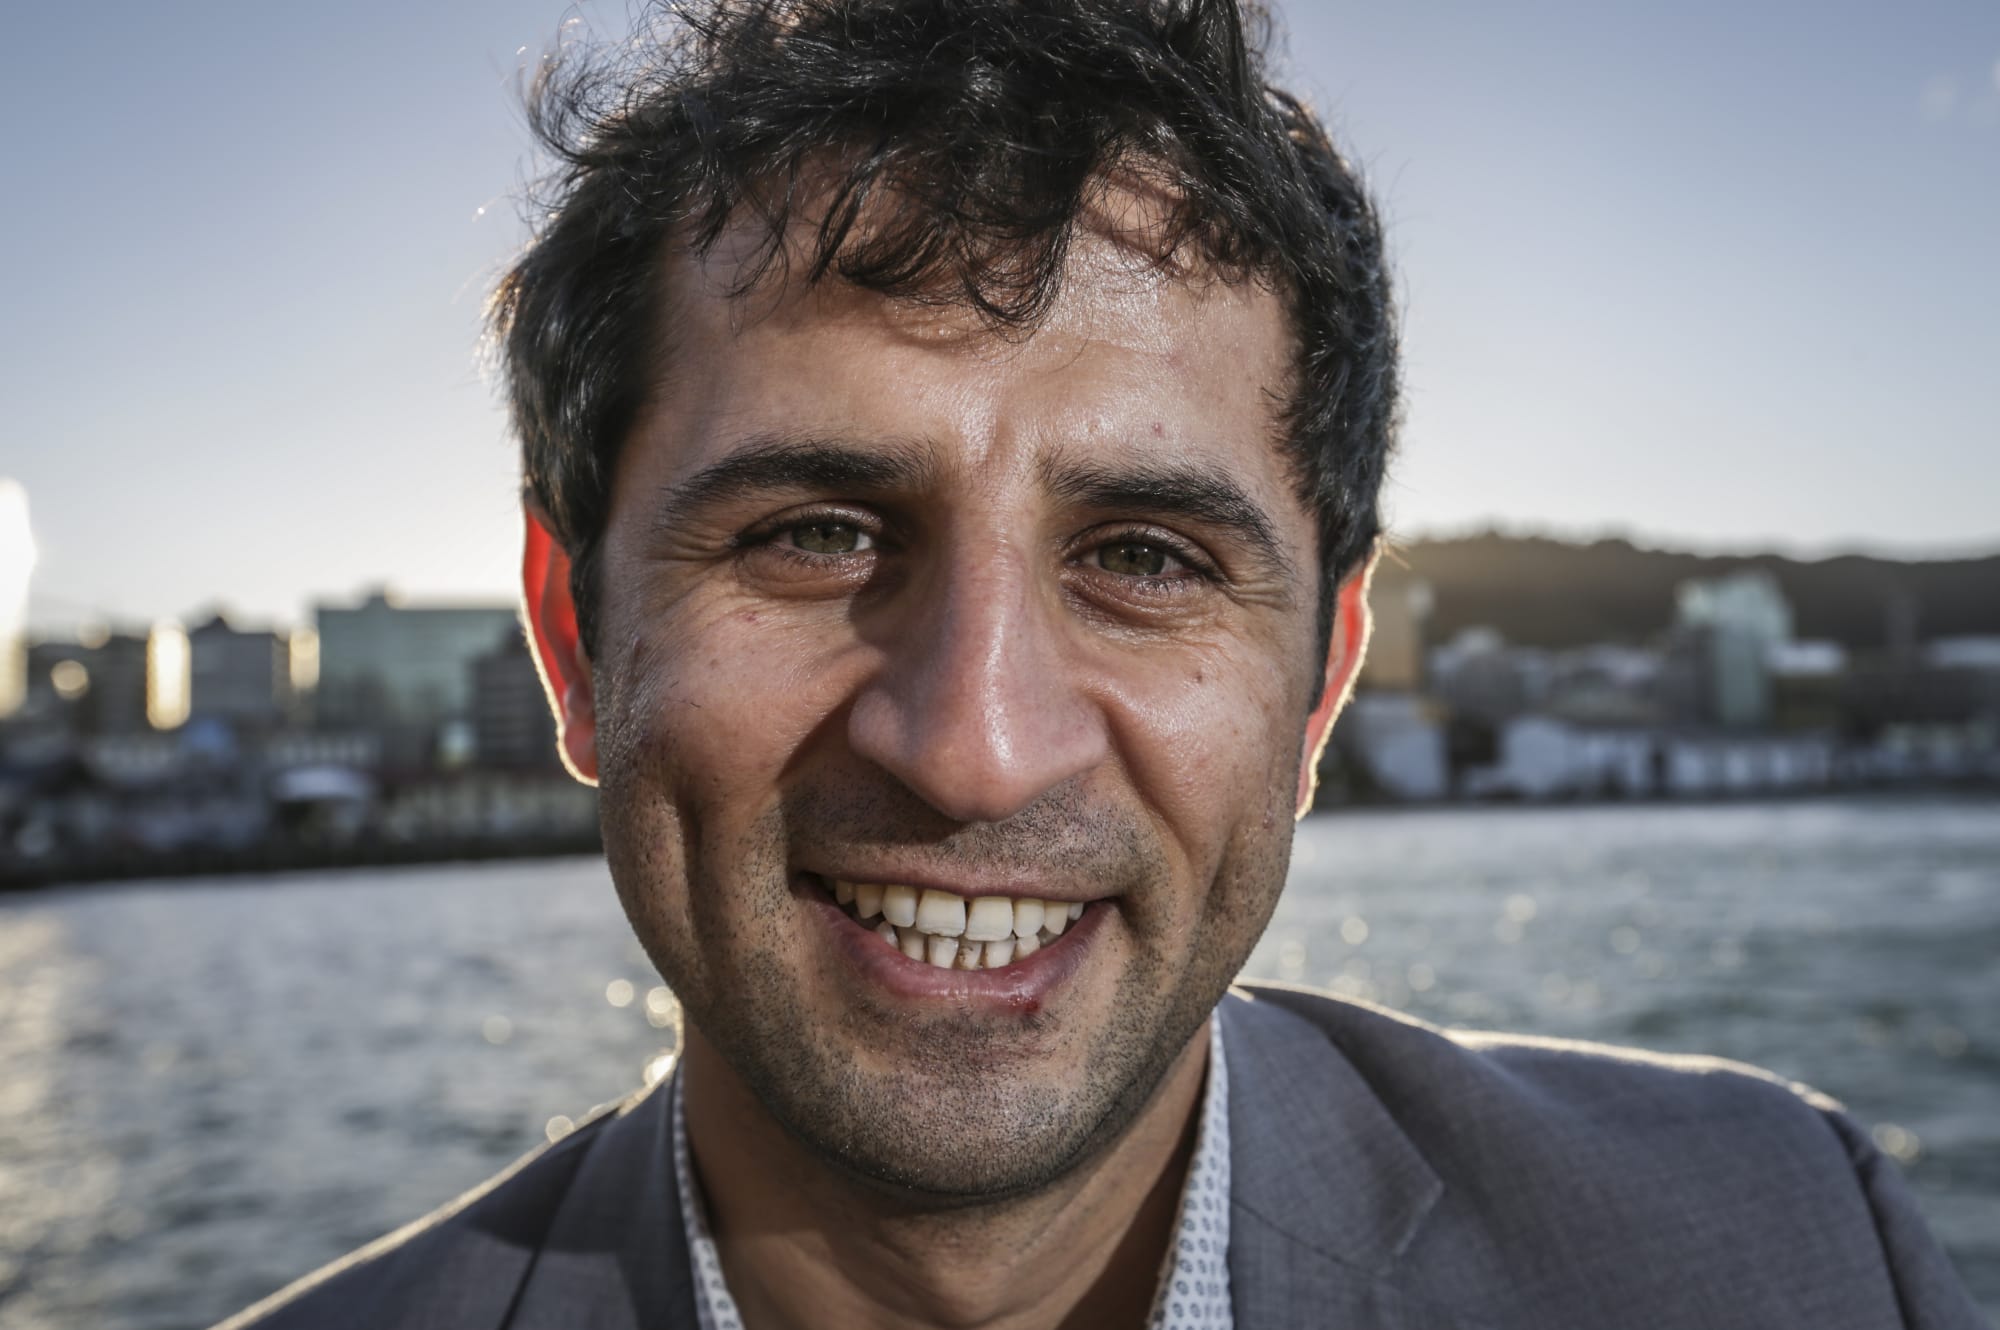 Iranian refugee Ail Mazraeh moved to New Zealand in 2009.